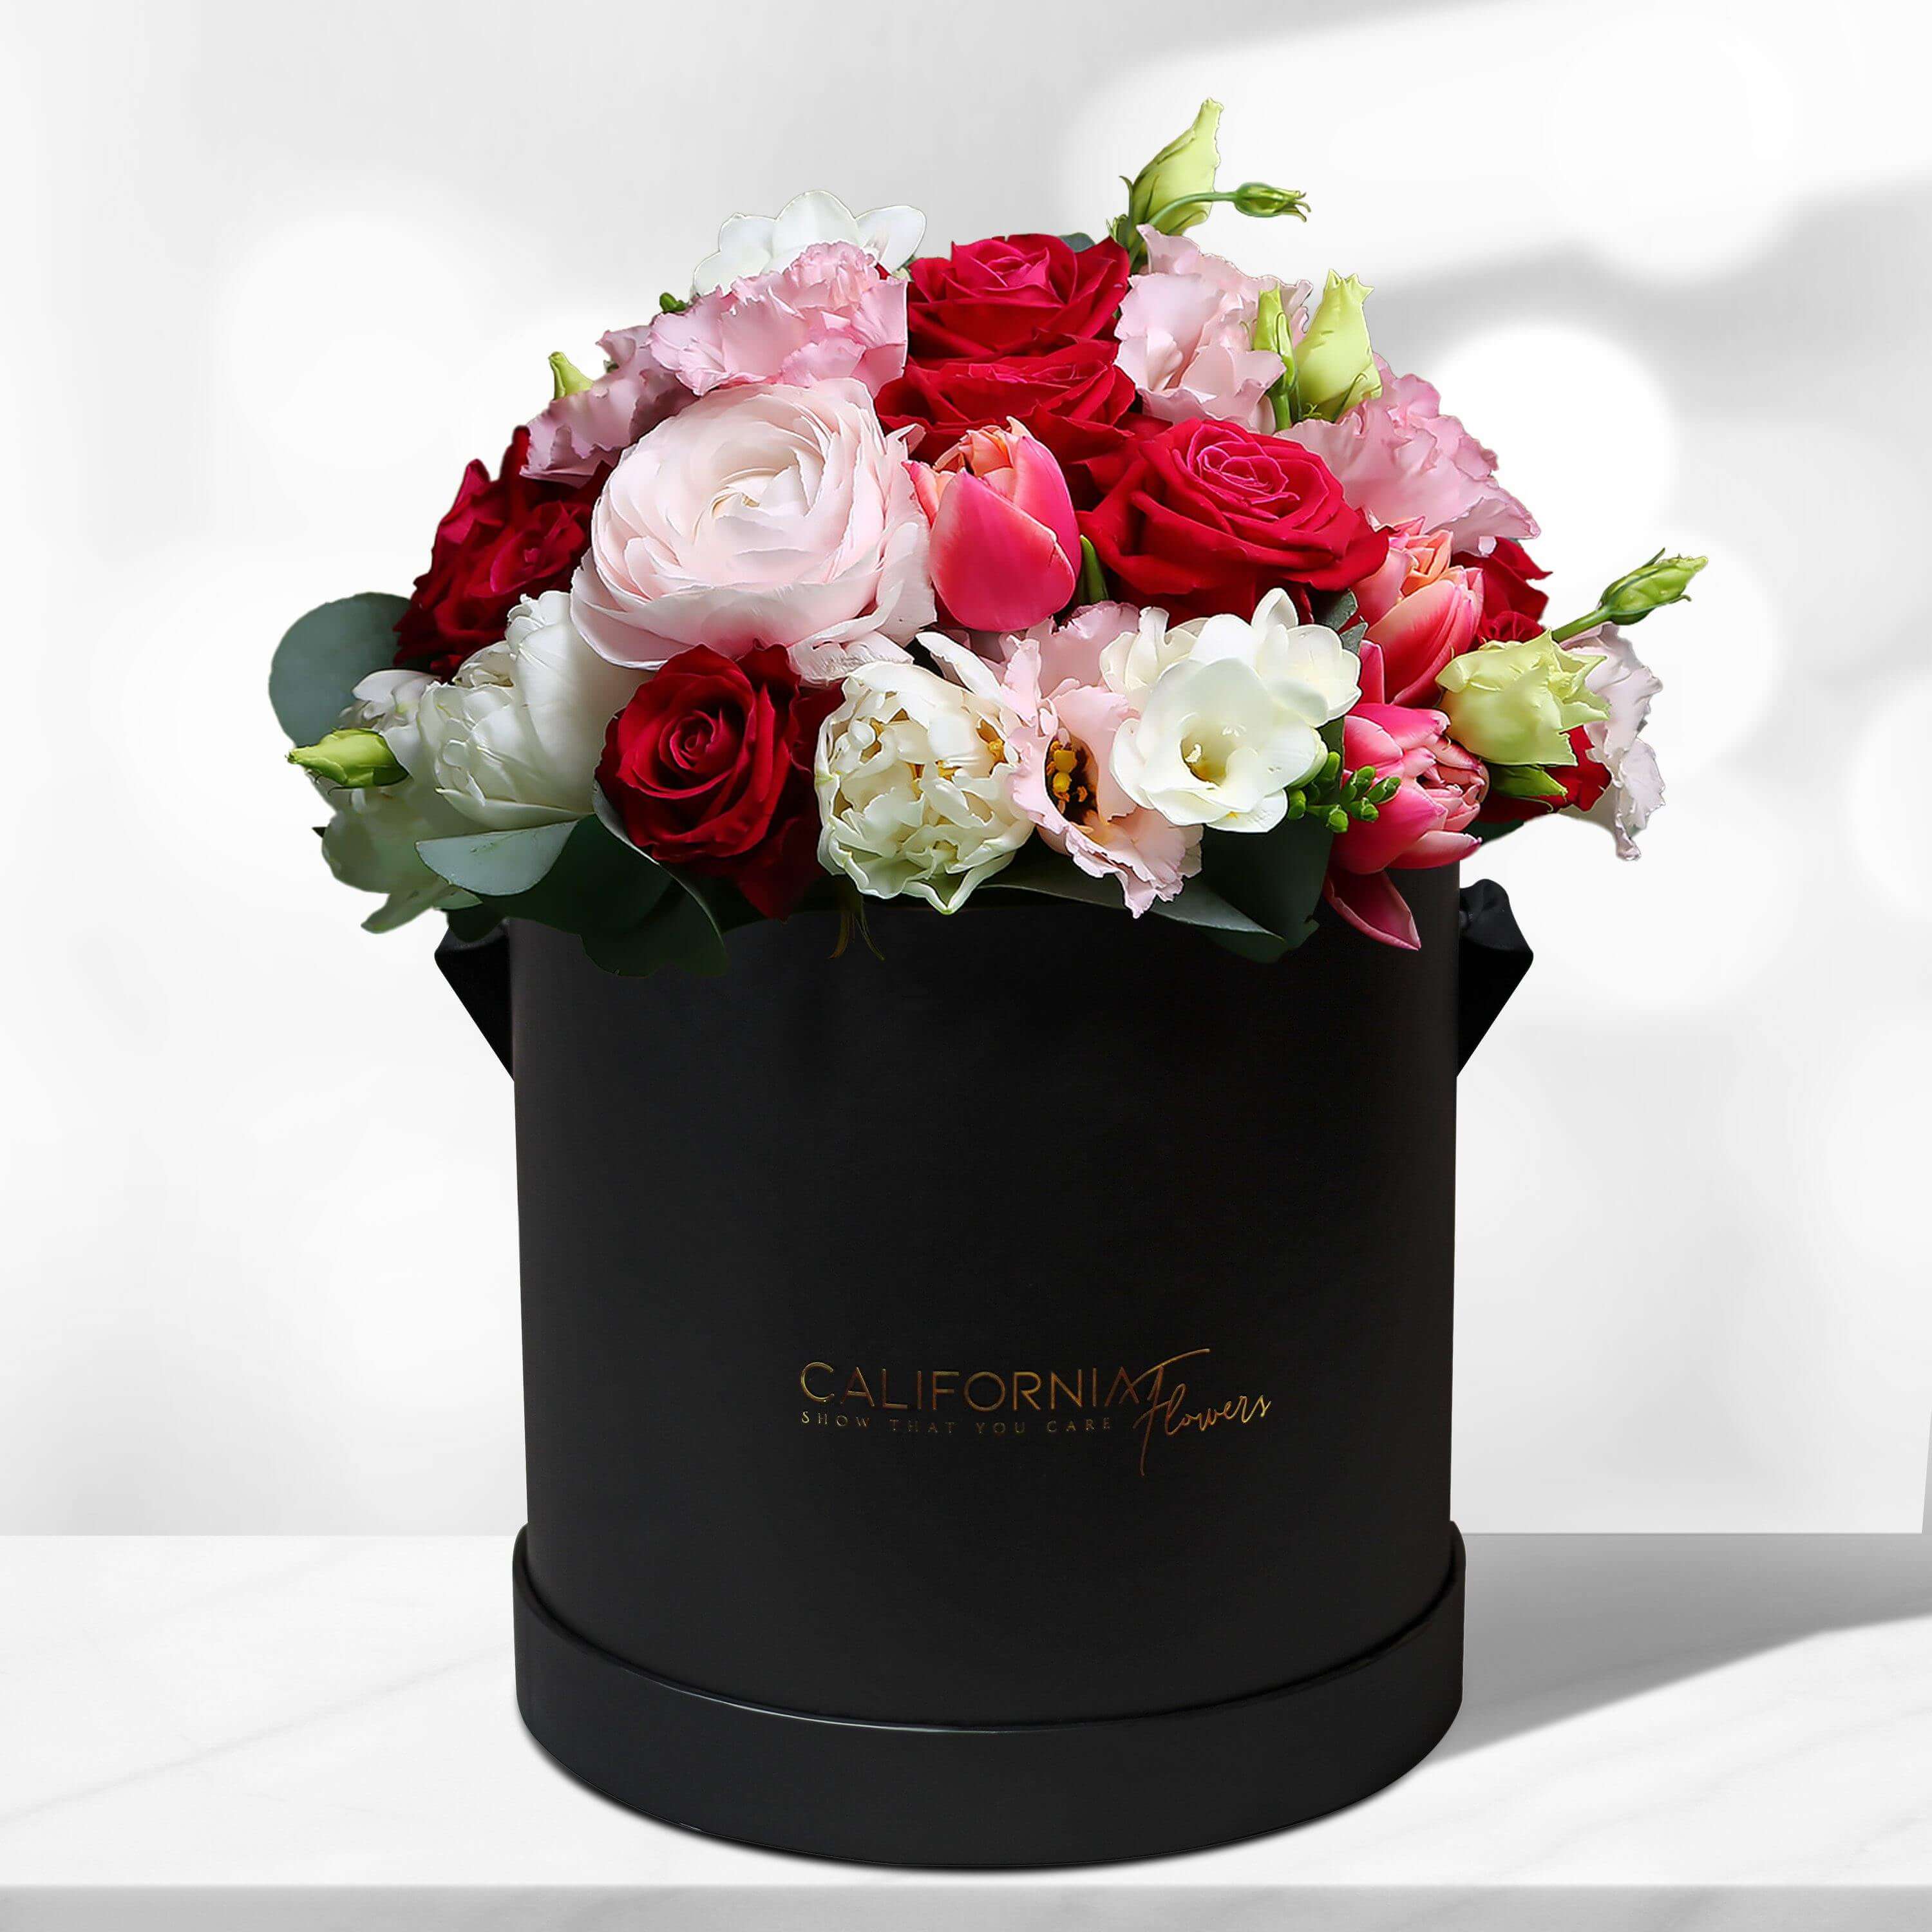 Box with roses, tros and lisianthus